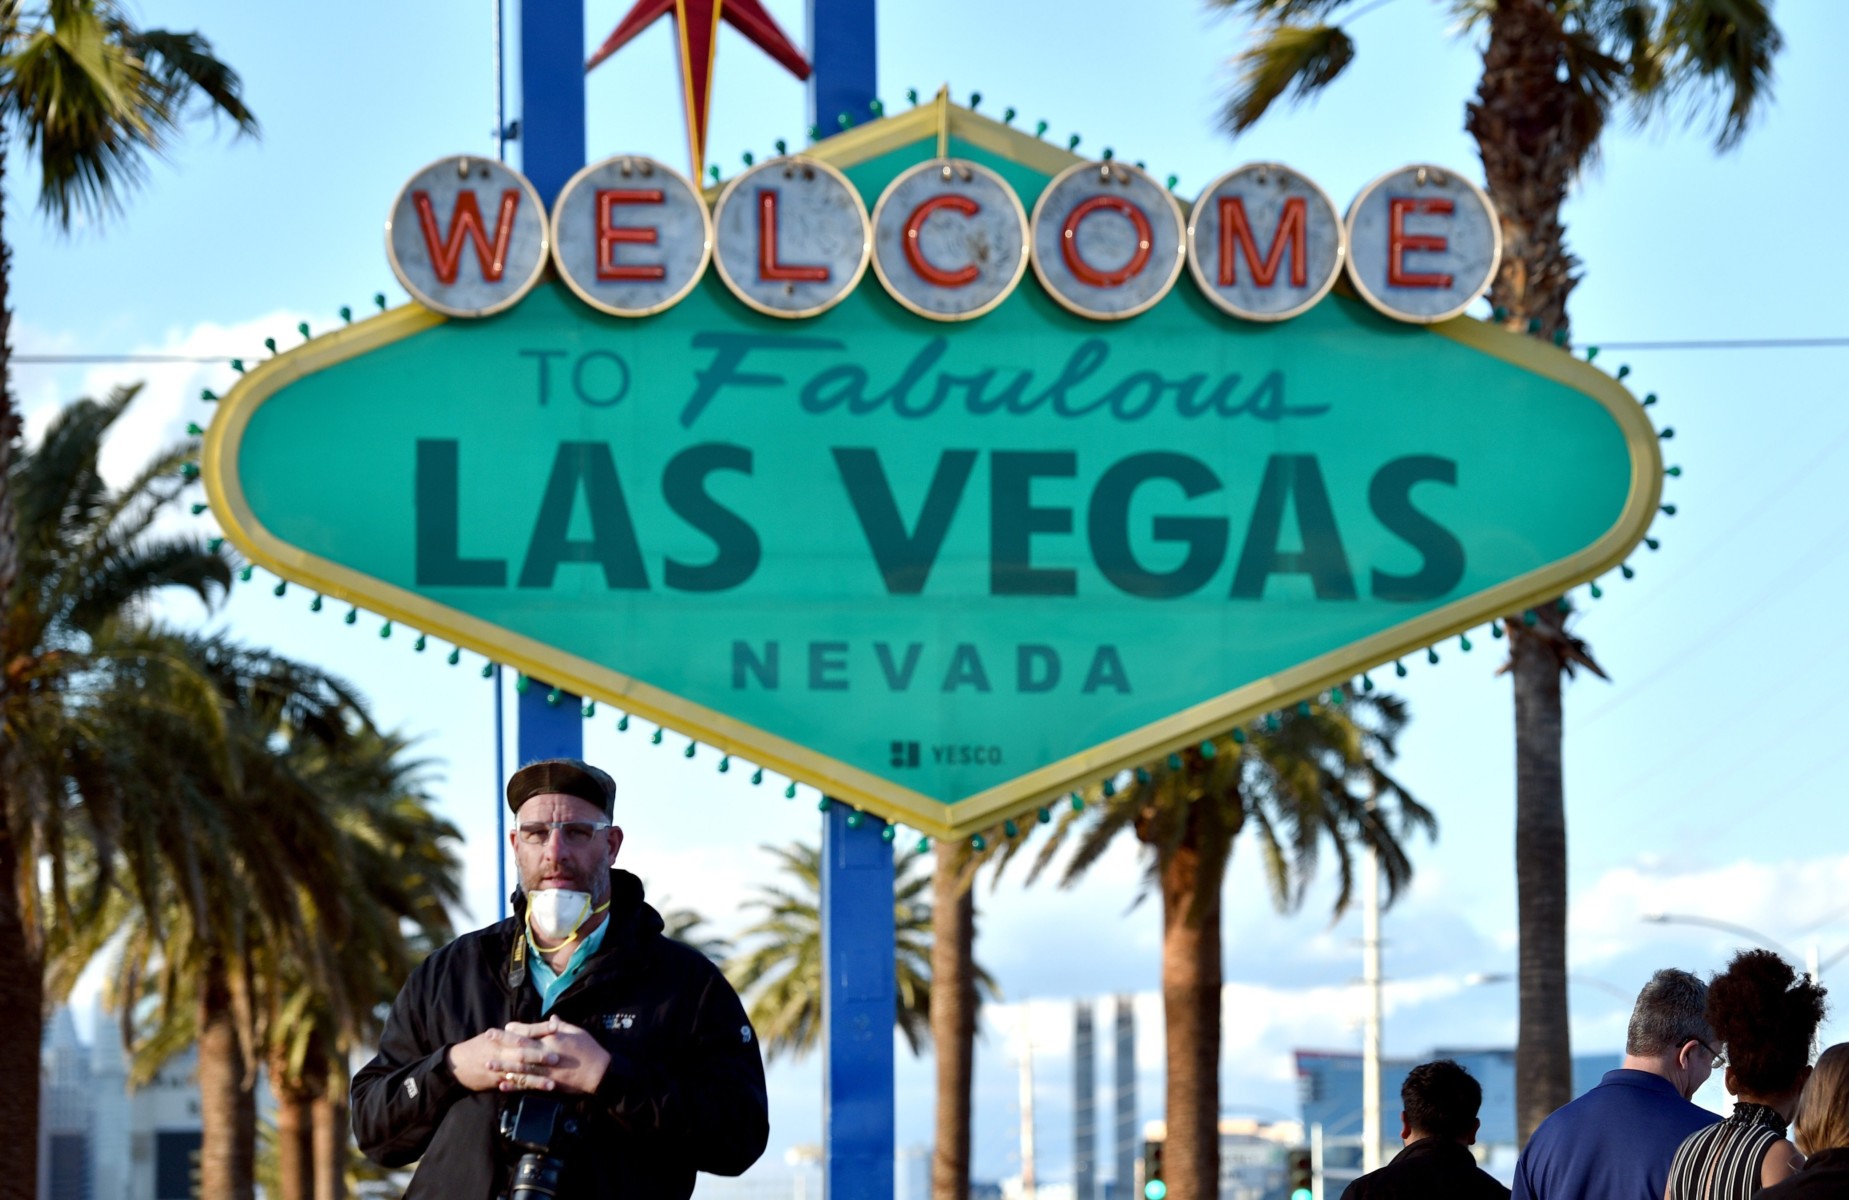 Las Vegas's strip is another popular landmark that was abandoned amid the virus panic